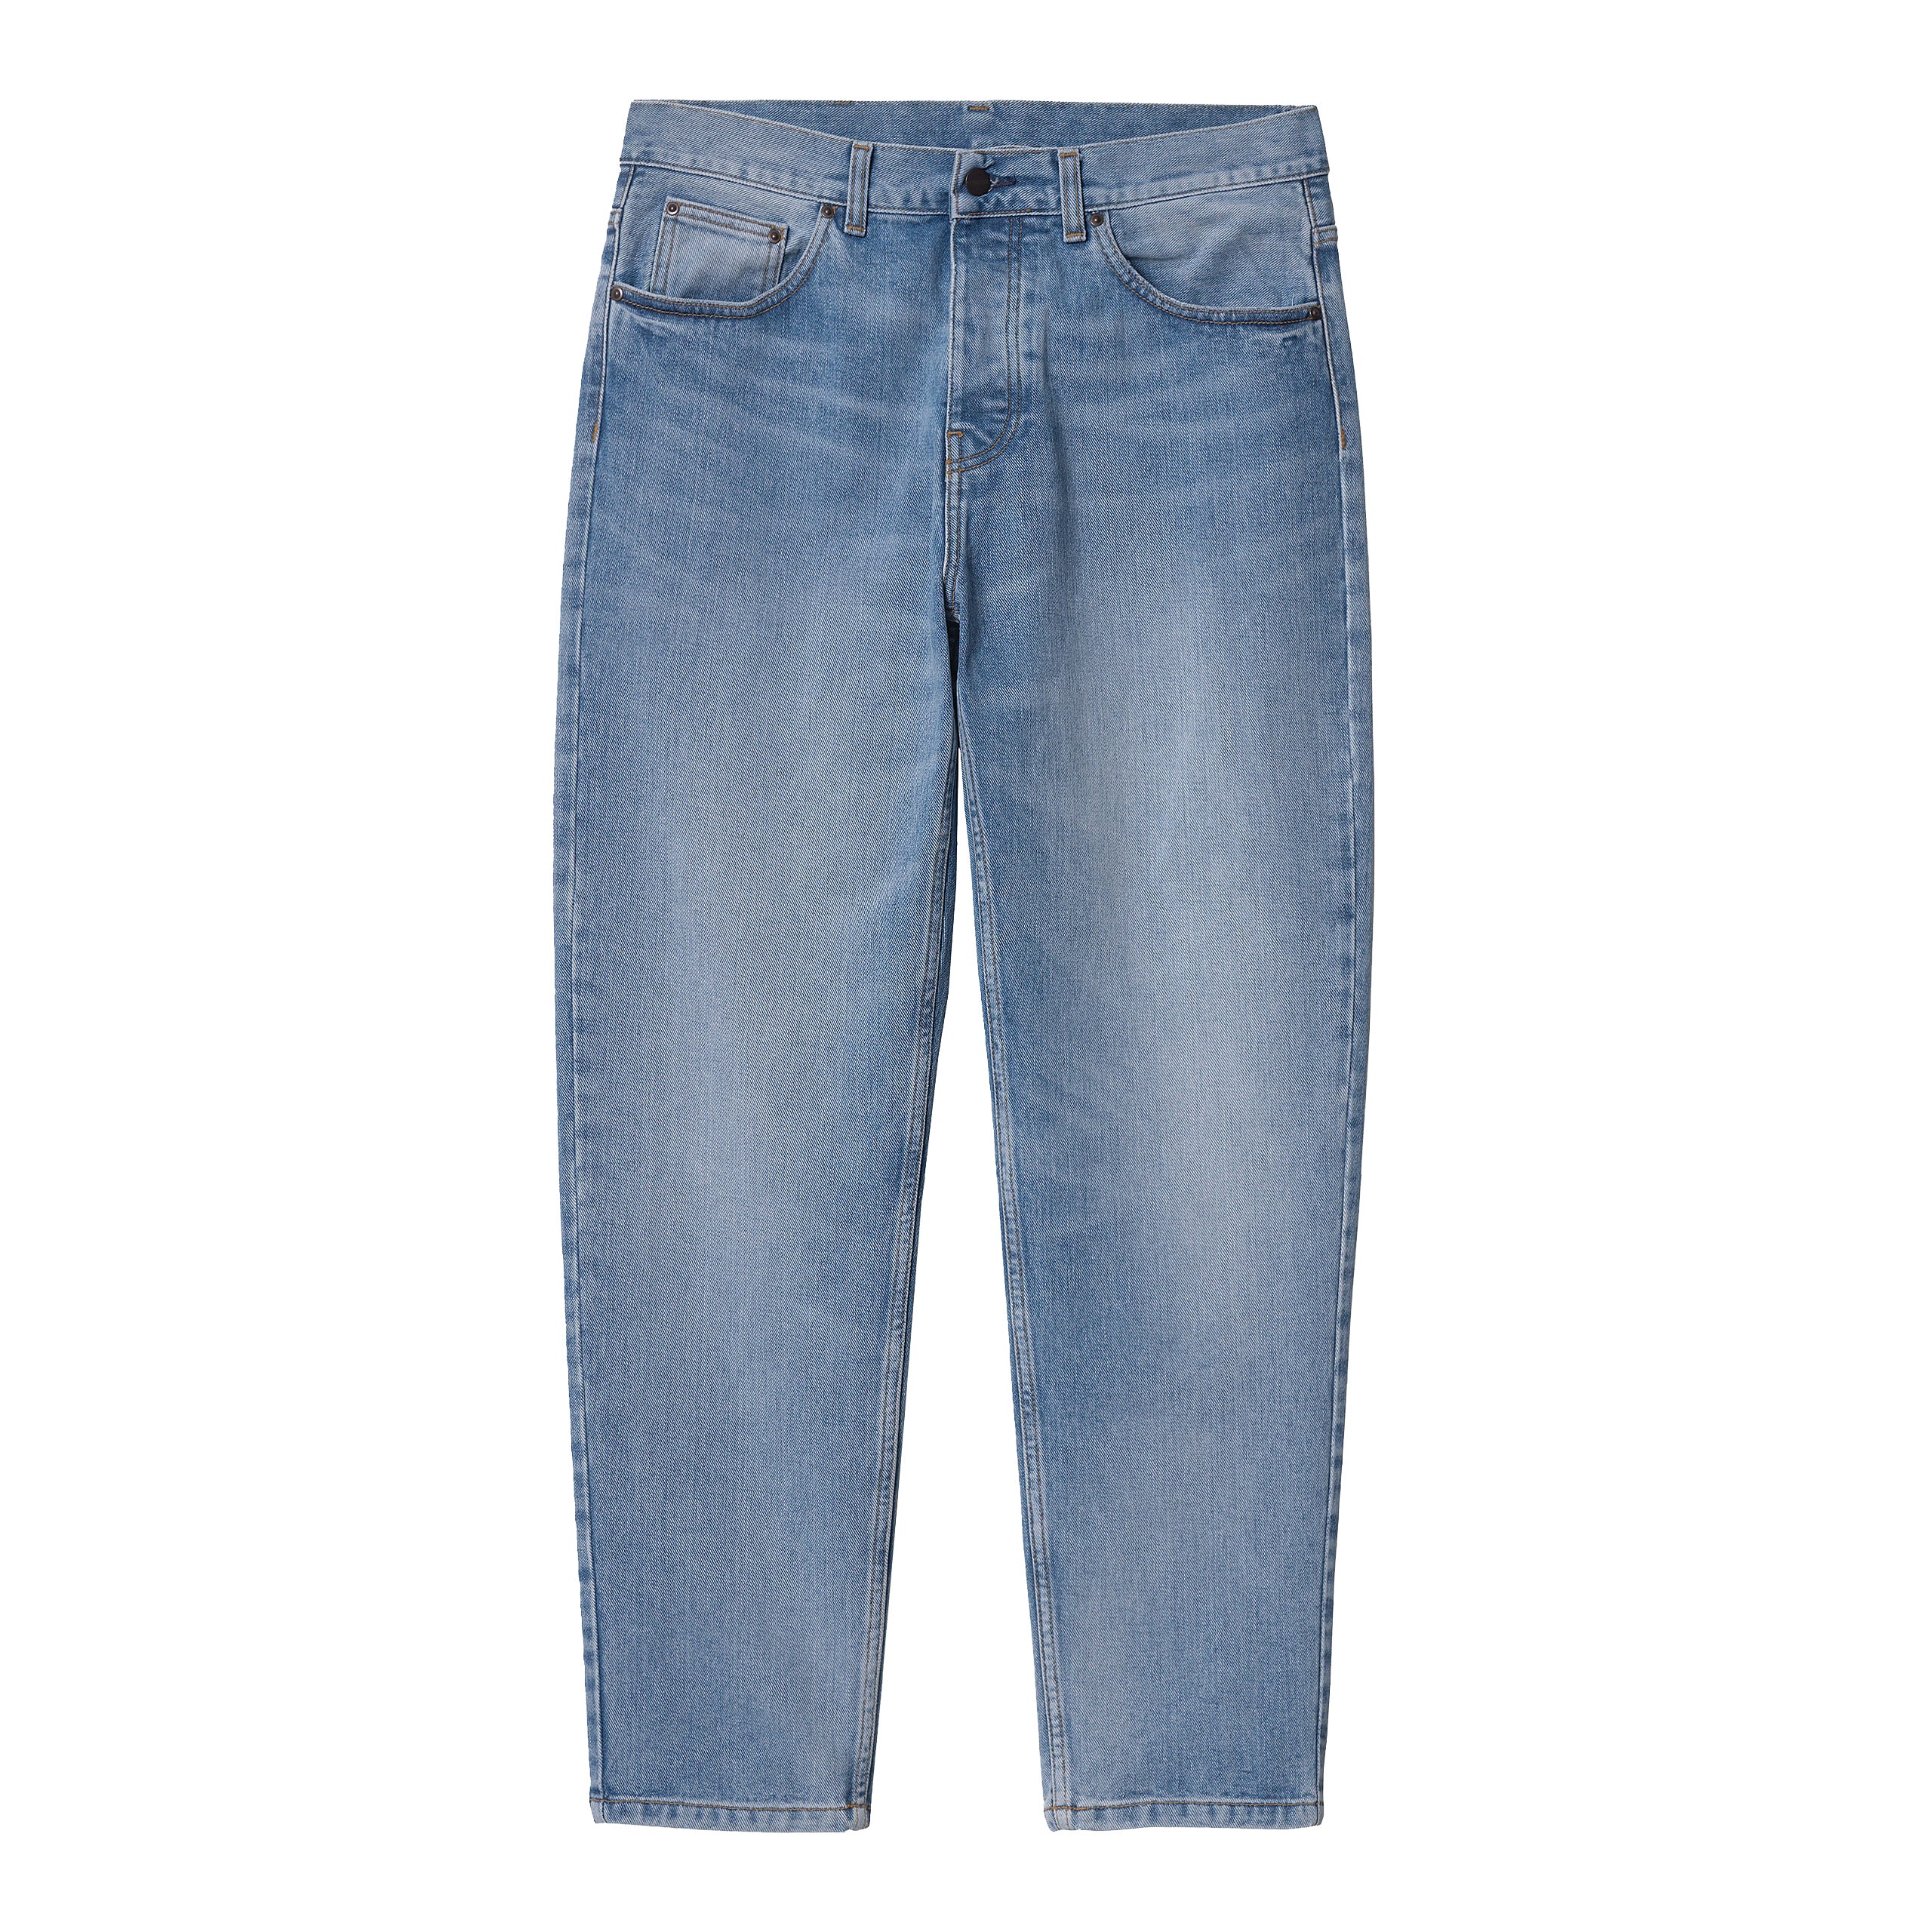 Carhartt WIP Newel Pant - Blue Light Used Washed